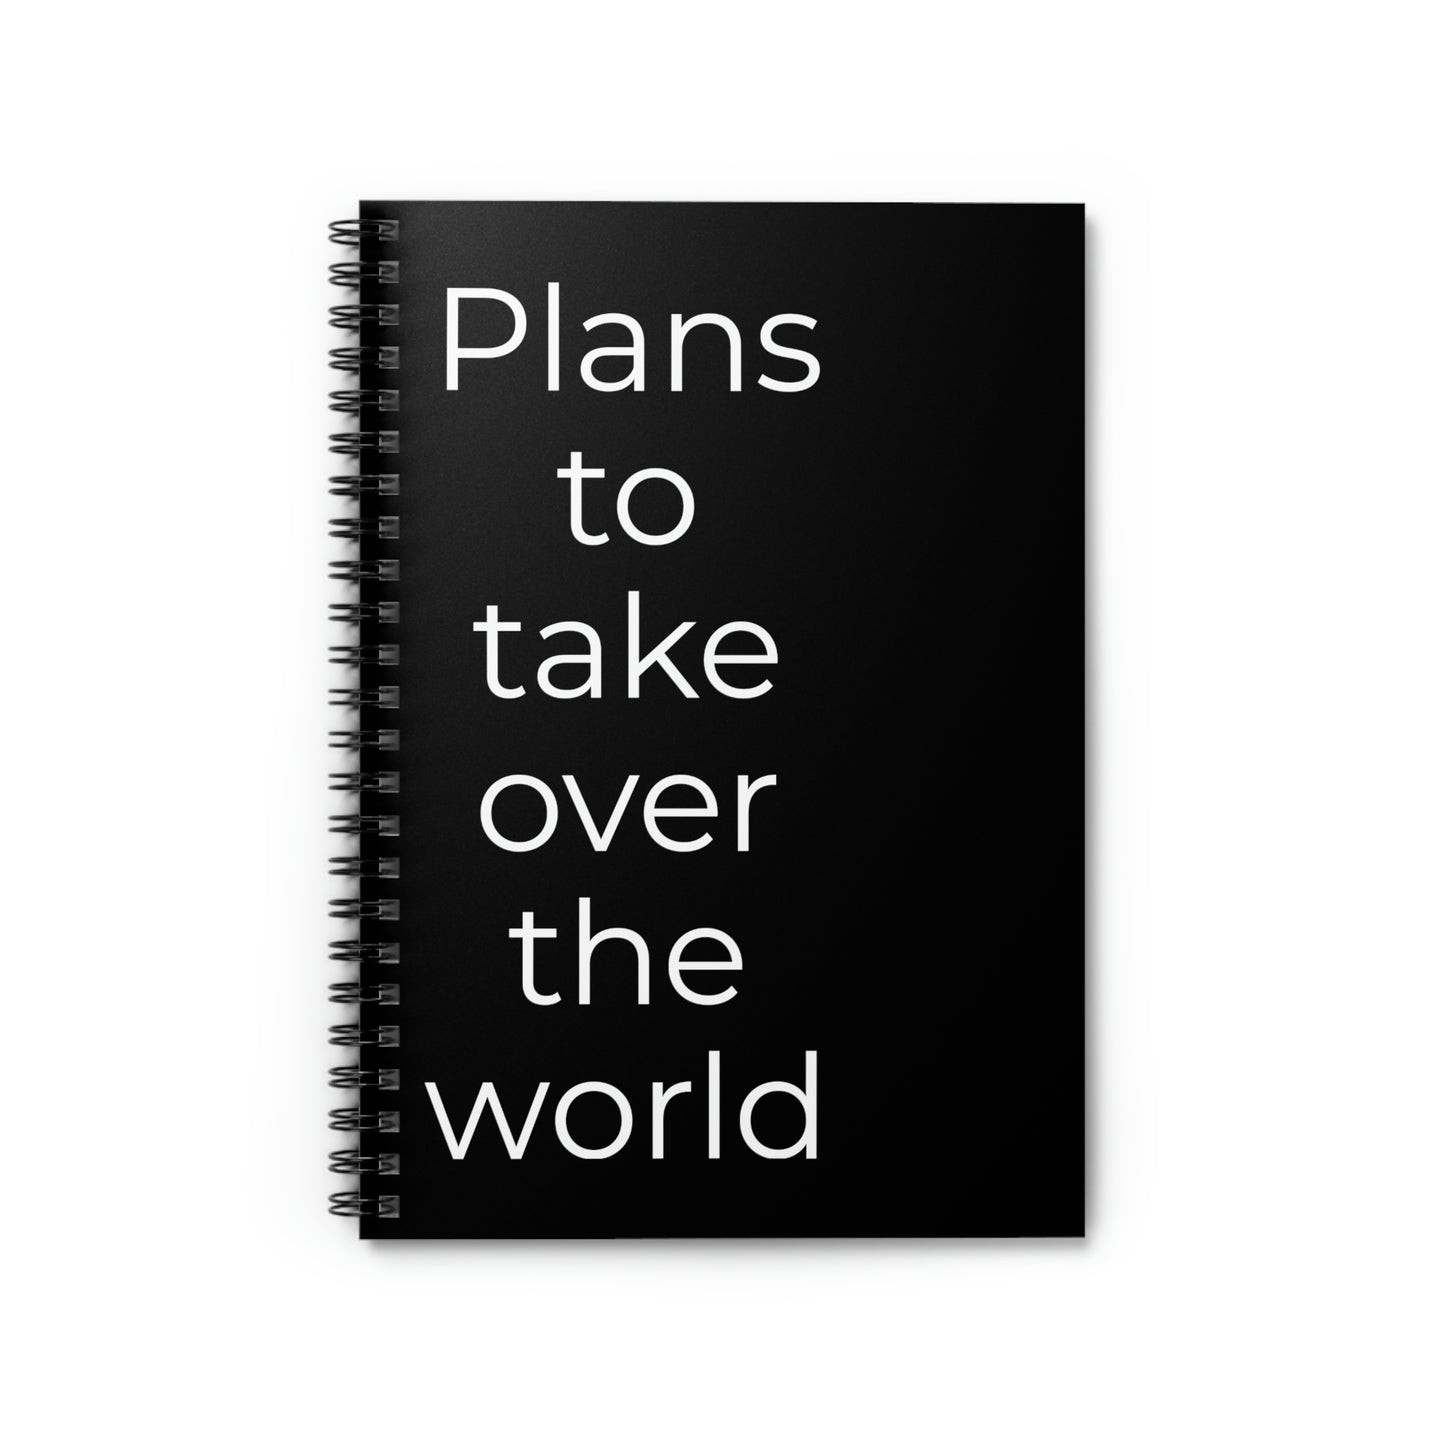 Plans to Take Over the World - Spiral Bound Note Book